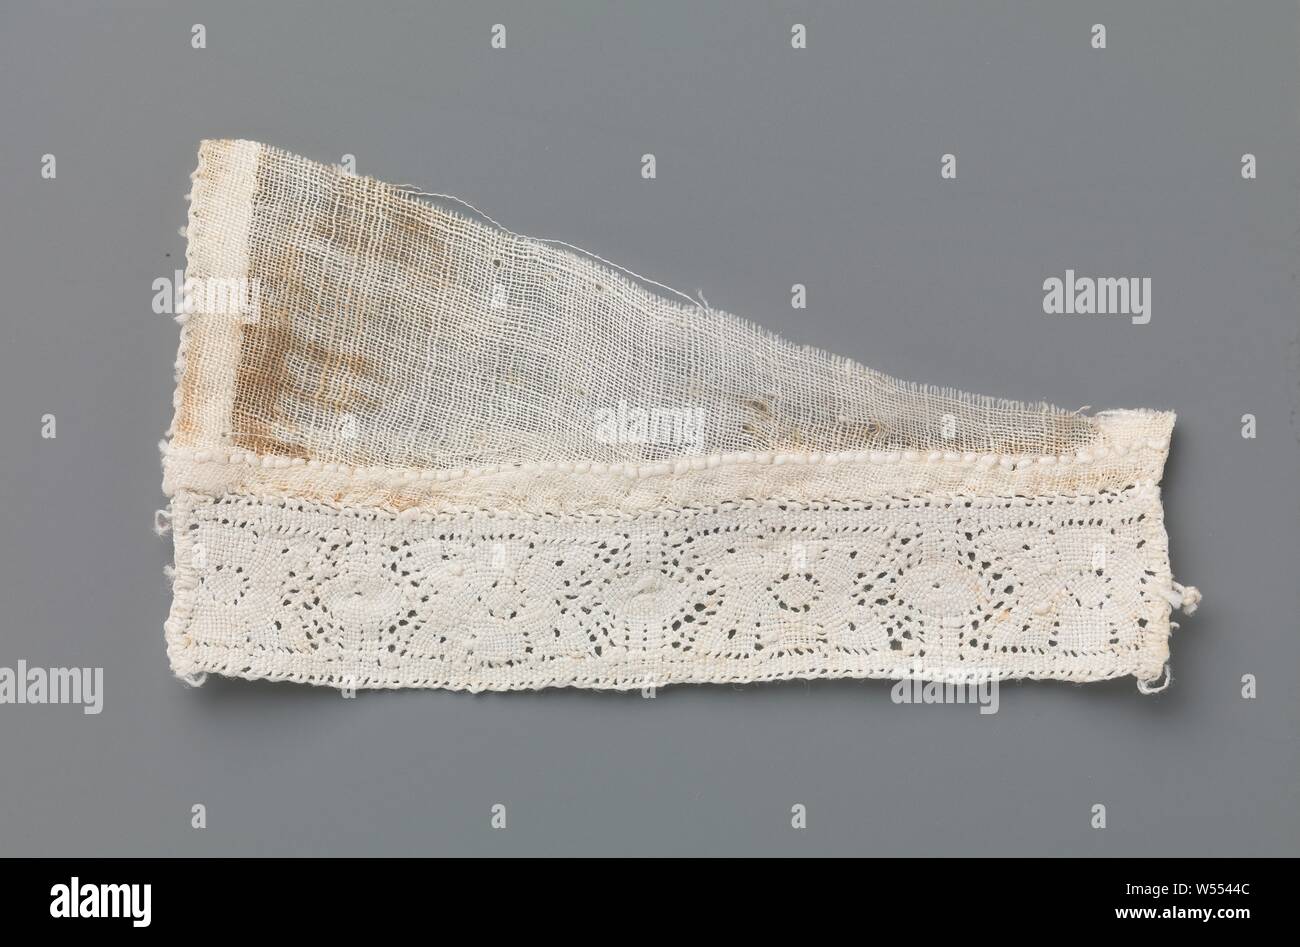 Strip of bobbin lace with stylized flower between two vertical lines and ovals on a triangular fragment of linen batist, Strip of natural-colored bobbin lace, old Flemish lace or Dutch bobbin lace. The strip is attached to a triangular piece of linen batiste. The lace has a pattern that consists of vertical straight lines, with a stylized flower in between. On the center line, the flower is flanked left and right by a horizontal pointed oval, which always crosses the vertical line. The motifs are made of linen with cutouts, there is hardly any ground, the motifs are connected by very short Stock Photo